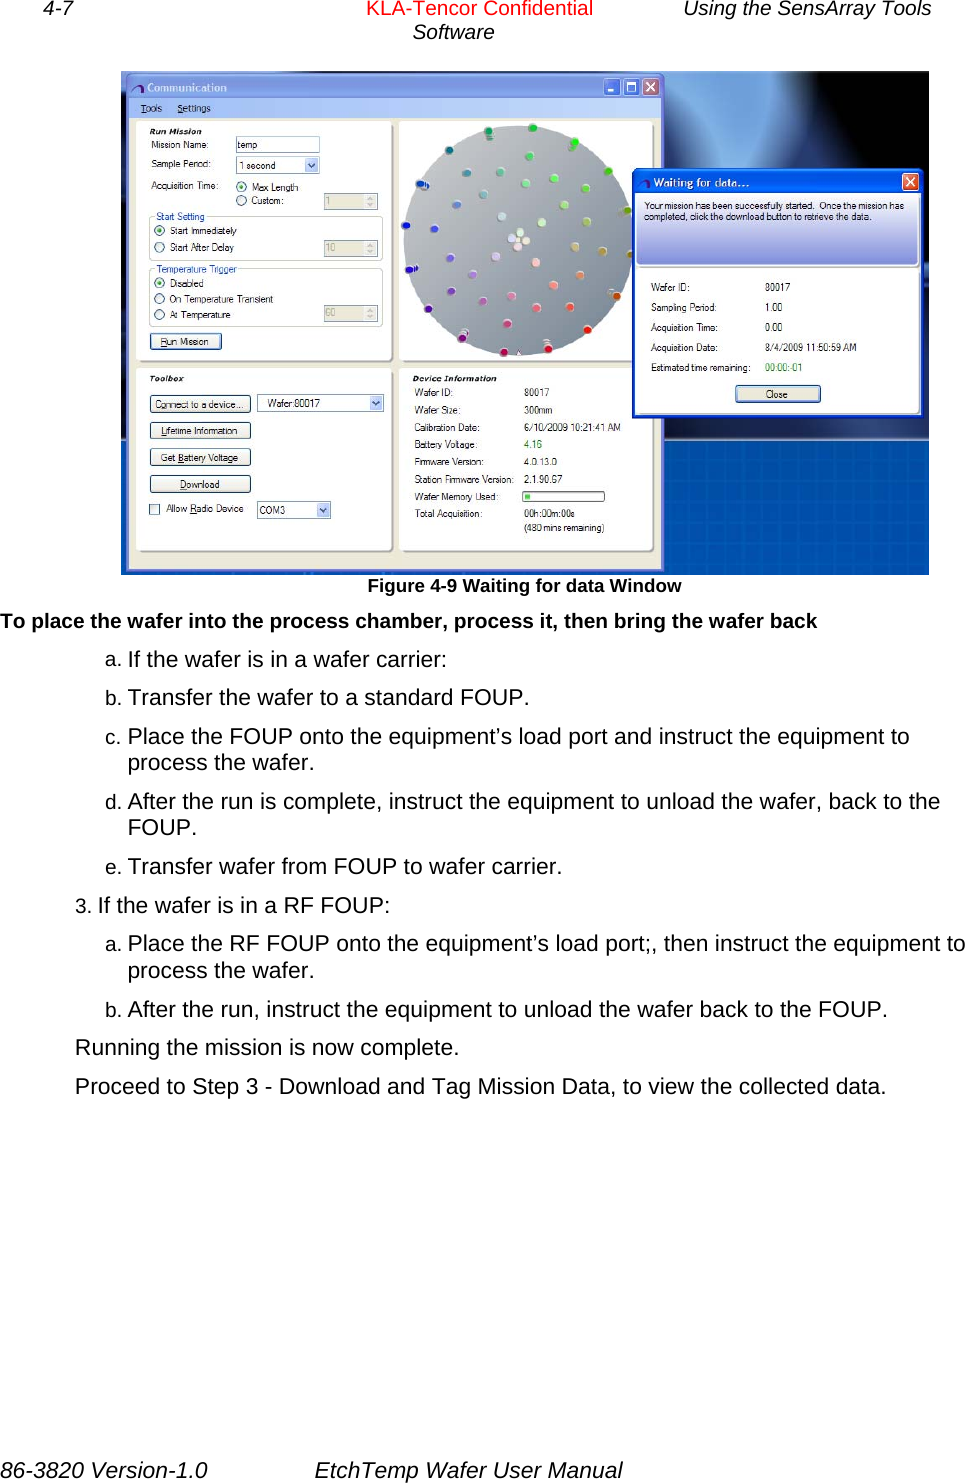 4-7        KLA-Tencor Confidential         Using the SensArray Tools Software   Figure 4-9 Waiting for data Window   To place the wafer into the process chamber, process it, then bring the wafer back a. If the wafer is in a wafer carrier: b. Transfer the wafer to a standard FOUP. c. Place the FOUP onto the equipment’s load port and instruct the equipment to process the wafer. d. After the run is complete, instruct the equipment to unload the wafer, back to the FOUP. e. Transfer wafer from FOUP to wafer carrier. 3. If the wafer is in a RF FOUP: a. Place the RF FOUP onto the equipment’s load port;, then instruct the equipment to process the wafer. b. After the run, instruct the equipment to unload the wafer back to the FOUP. Running the mission is now complete.  Proceed to Step 3 - Download and Tag Mission Data, to view the collected data. 86-3820 Version-1.0  EtchTemp Wafer User Manual 